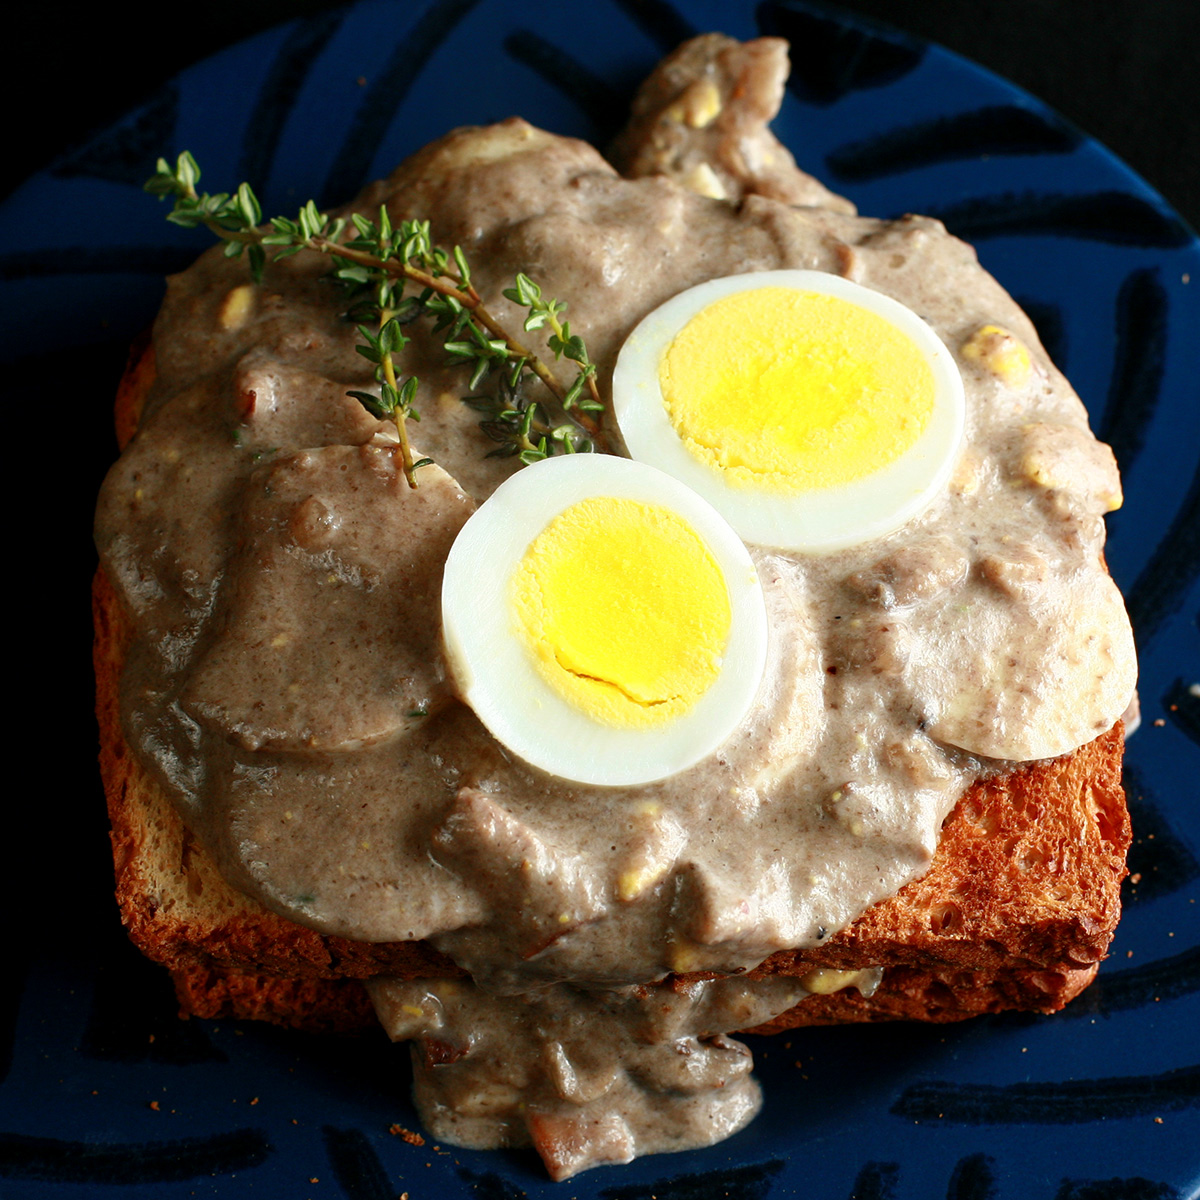 Gluten-Free Mushroom Soup and Eggs on Toast, garnished with hardboiled egg slices and thyme.